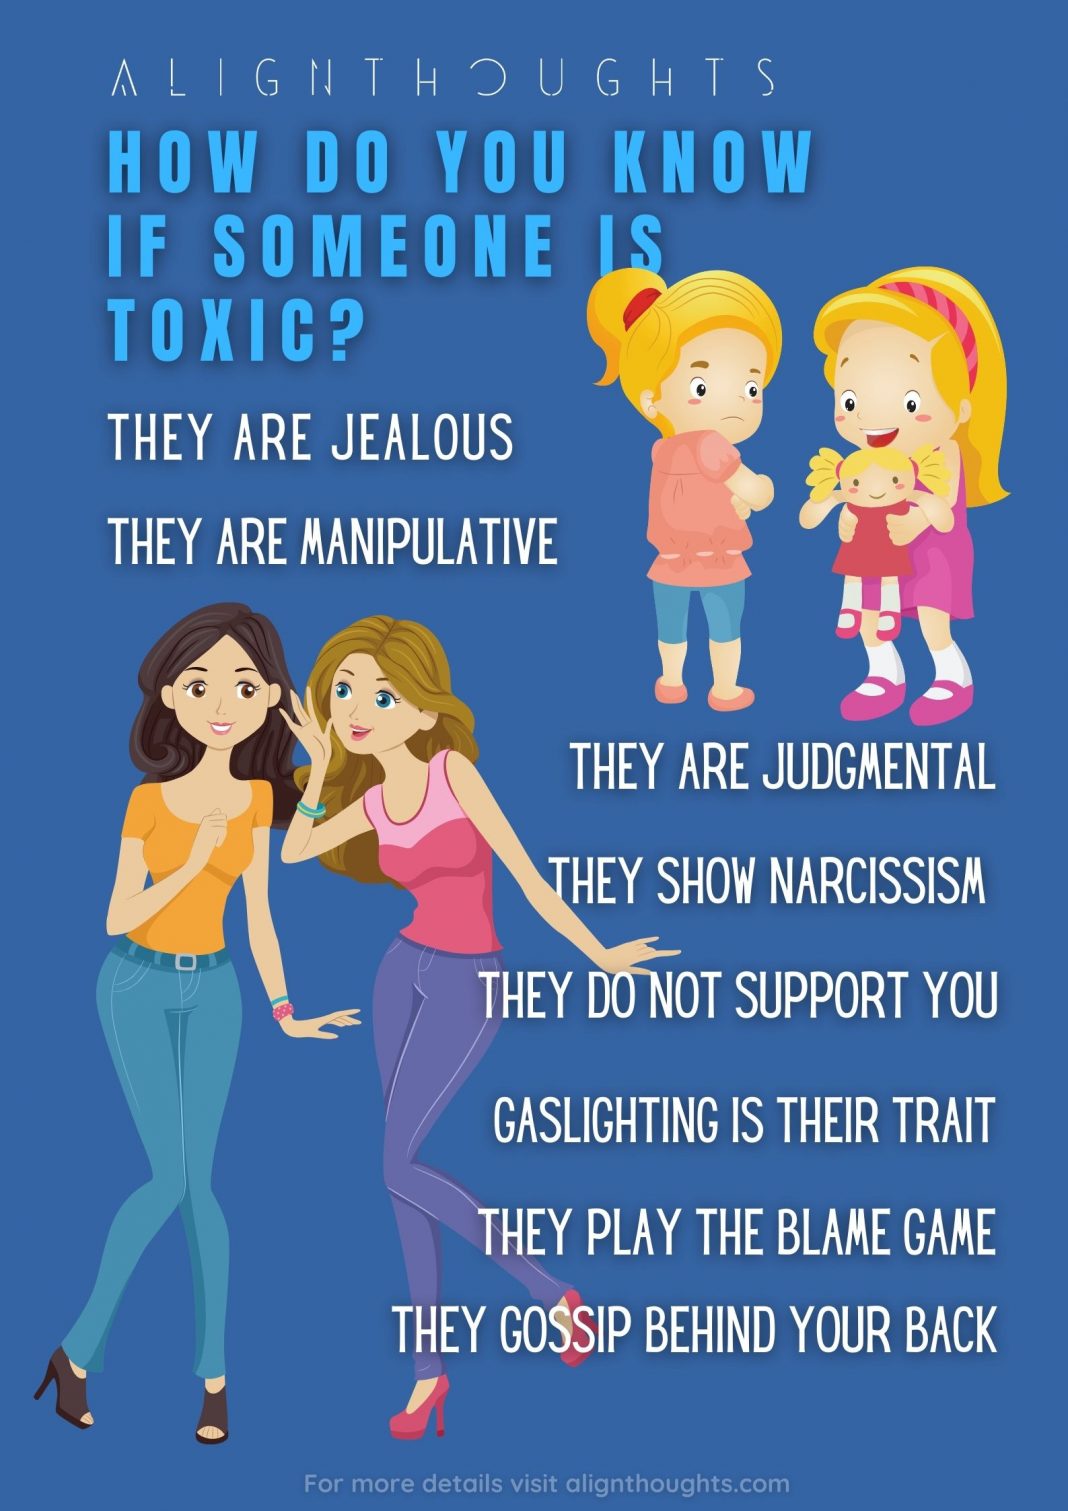 what do you mean by toxic relationship